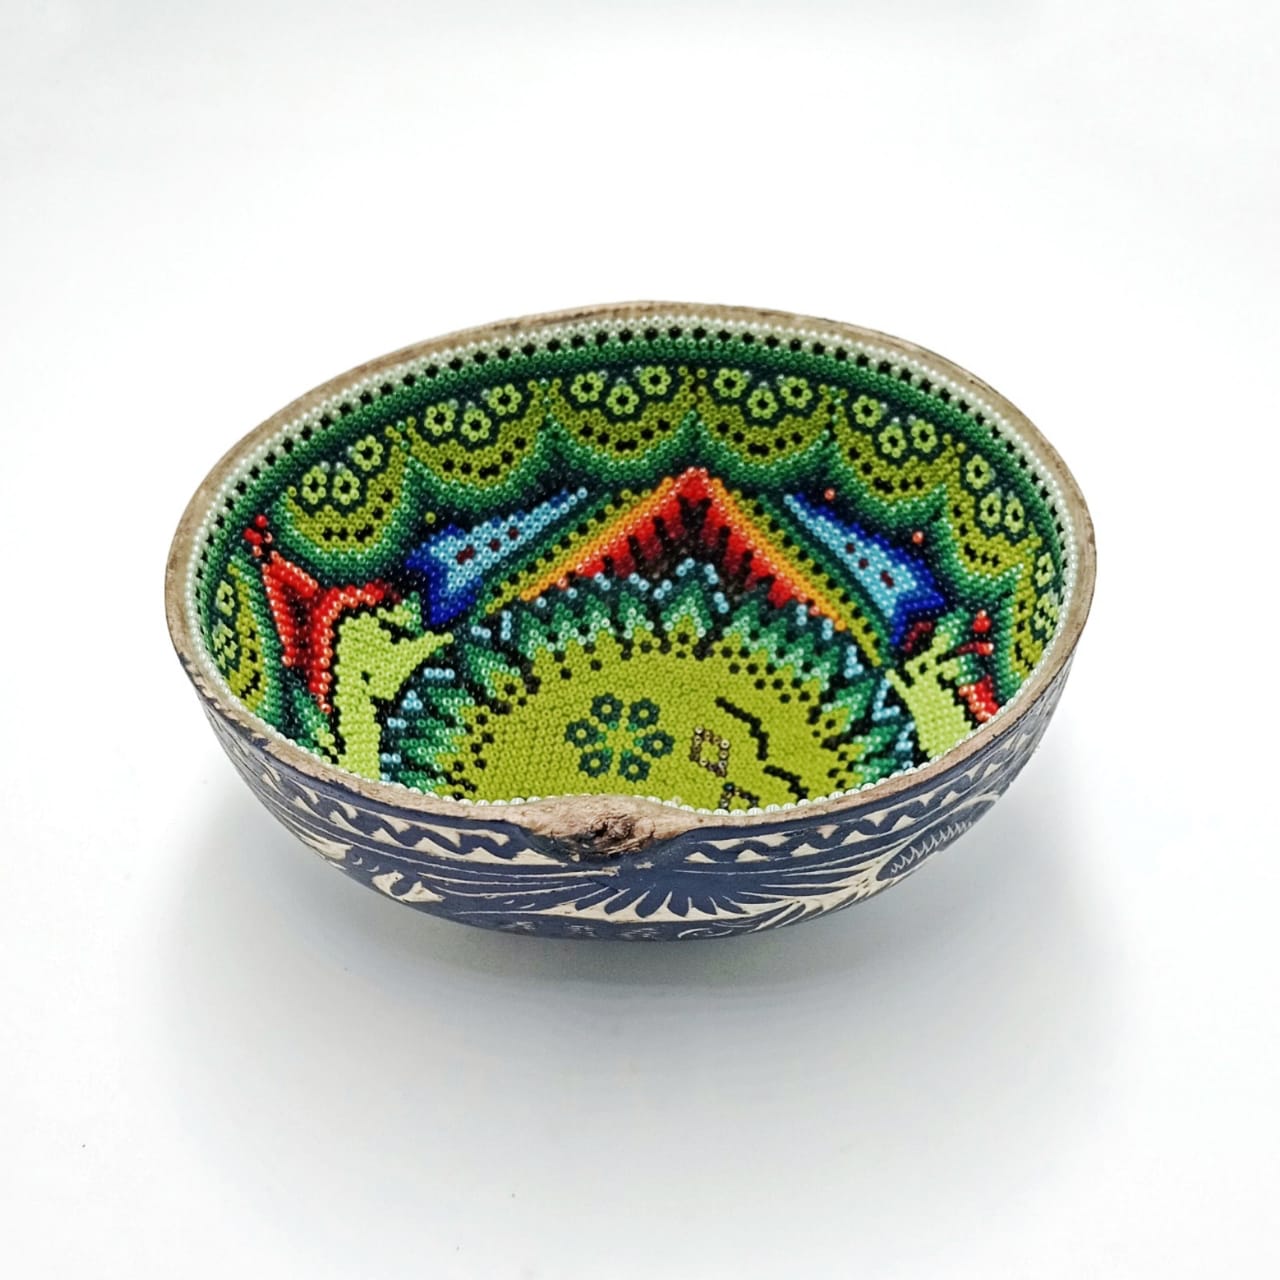 Huichol Hand Beaded Gourd Bowl Using Glass Beads By Morelia Lopez PP6980